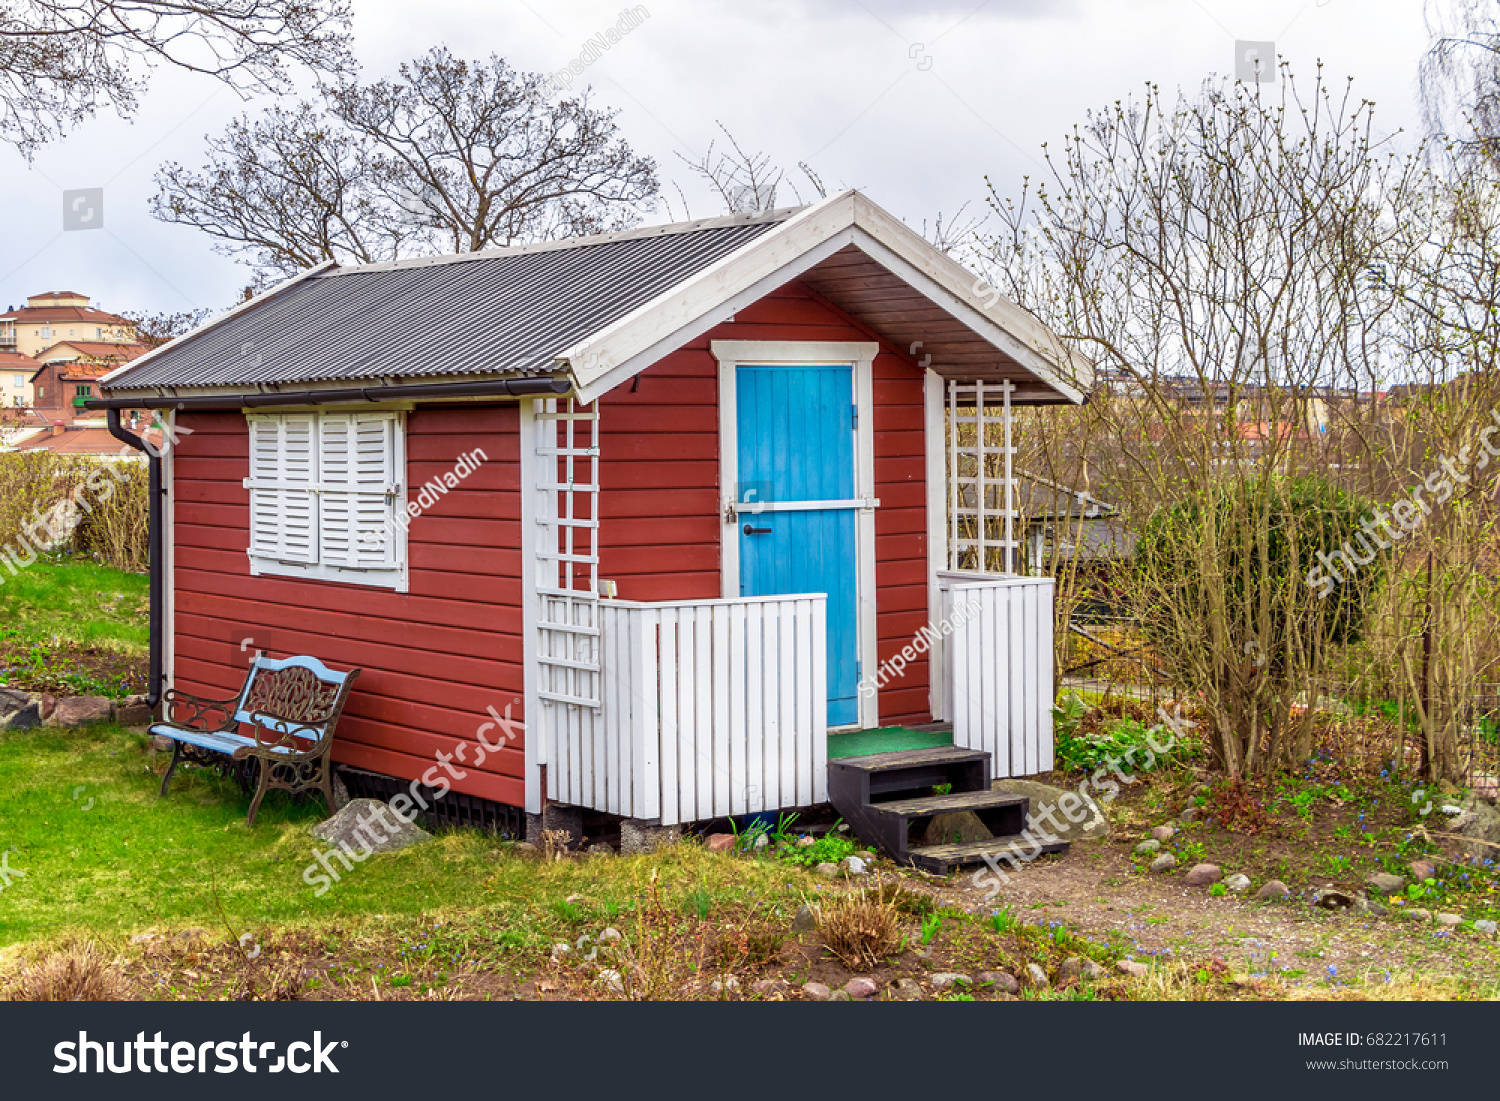 Red tiny house or shed at a plot of an allotment. Early spring time. Small red shack with blue door, white frames, shutters and metal forged bench by wall. Hut painted in traditional Swedish red color #682217611